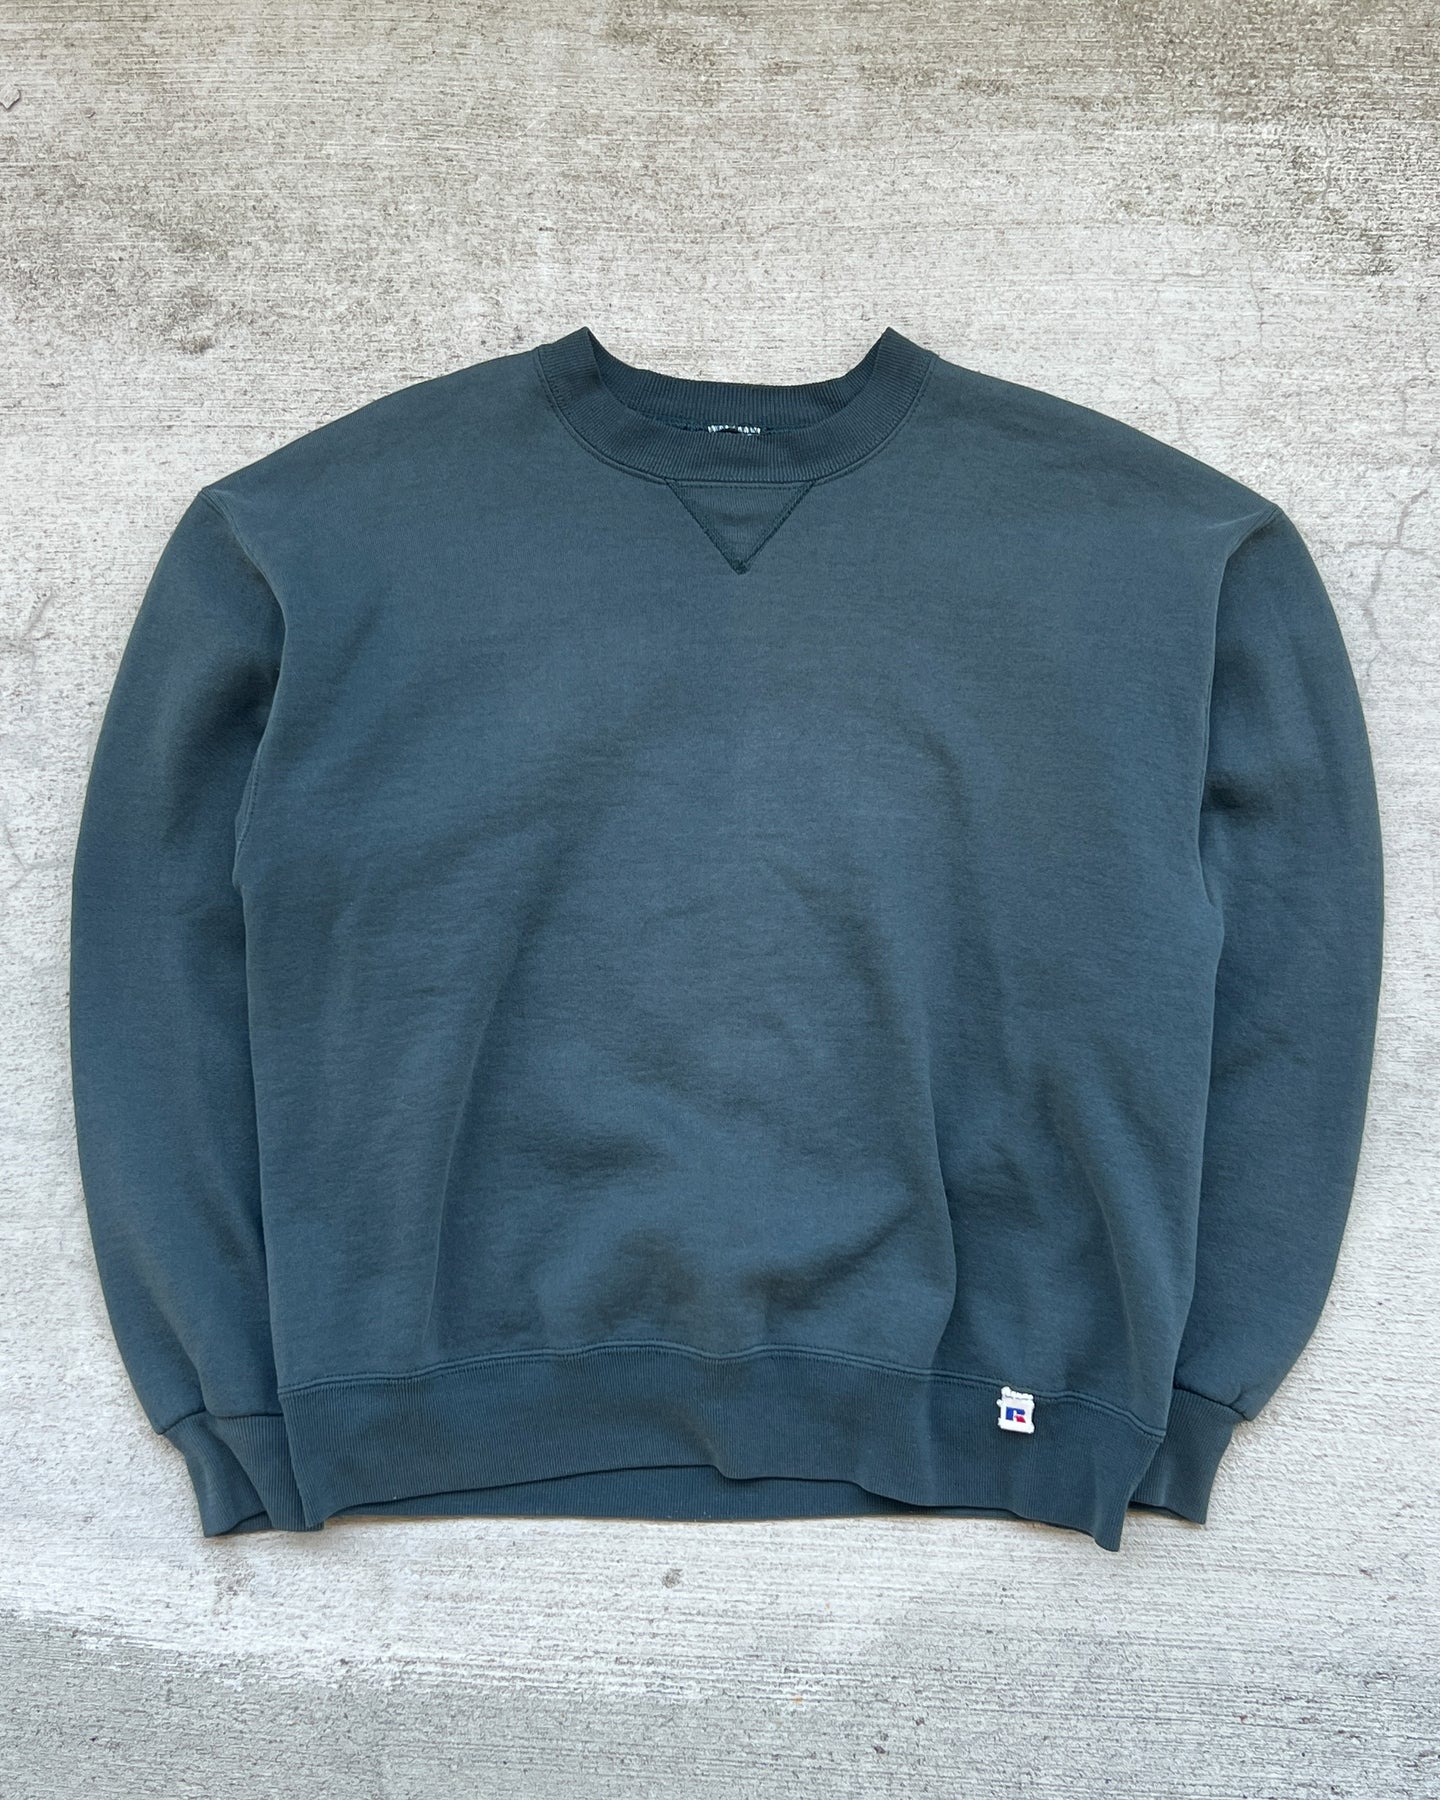 1990s Russell Athletic Sea Green Creweneck Sweatshirt - Size X-Large